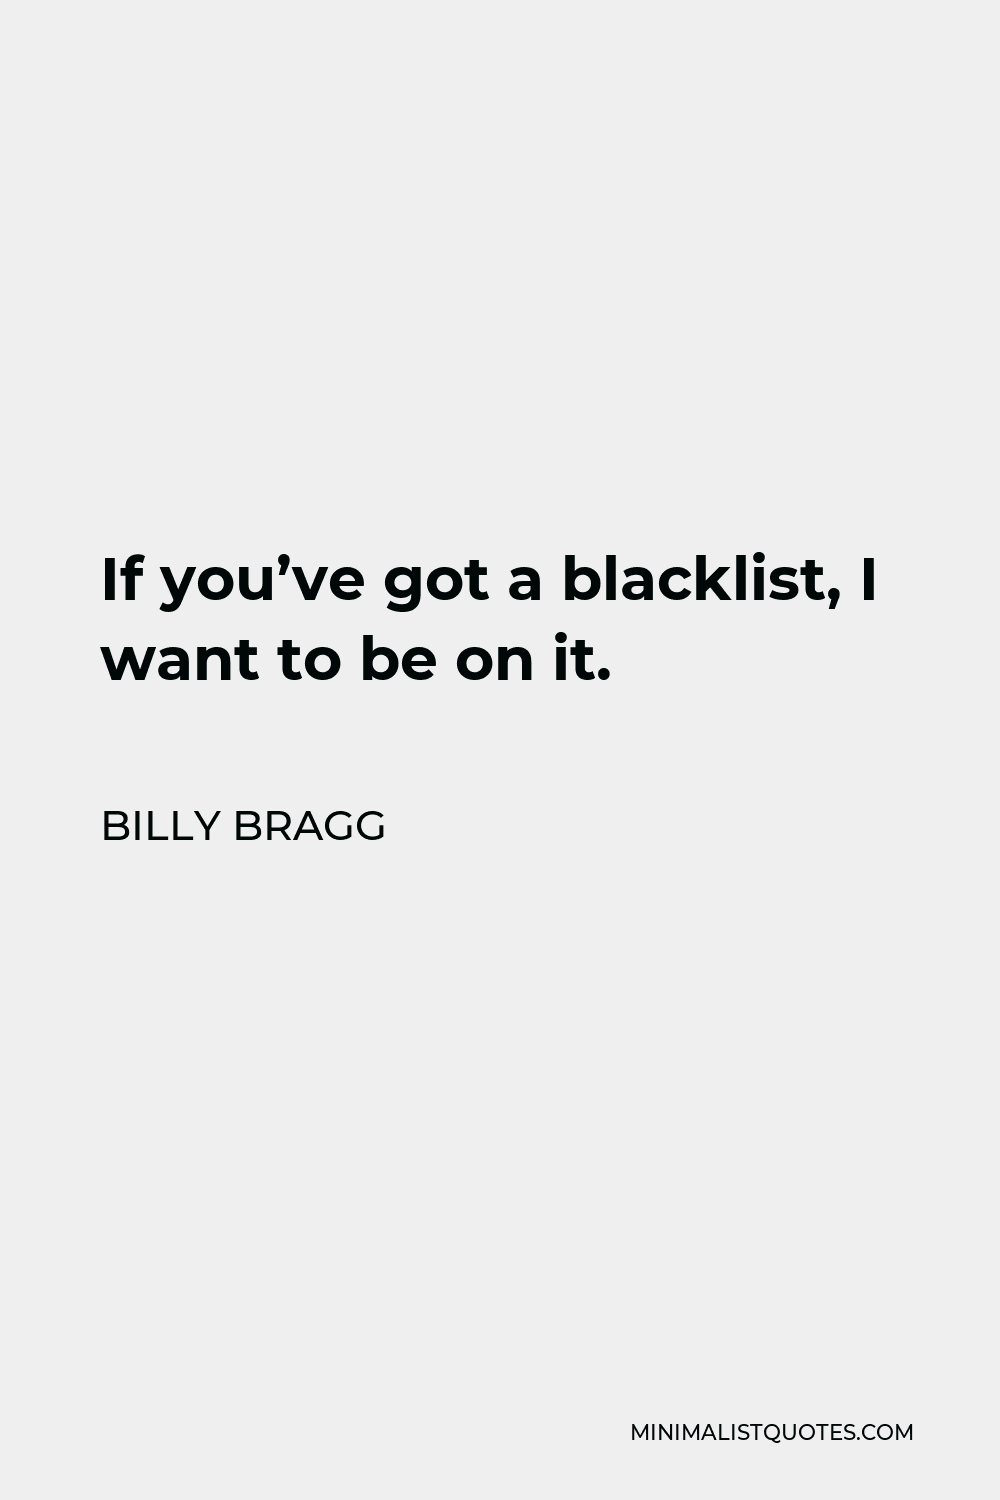 Billy Bragg Quote - If you’ve got a blacklist, I want to be on it.